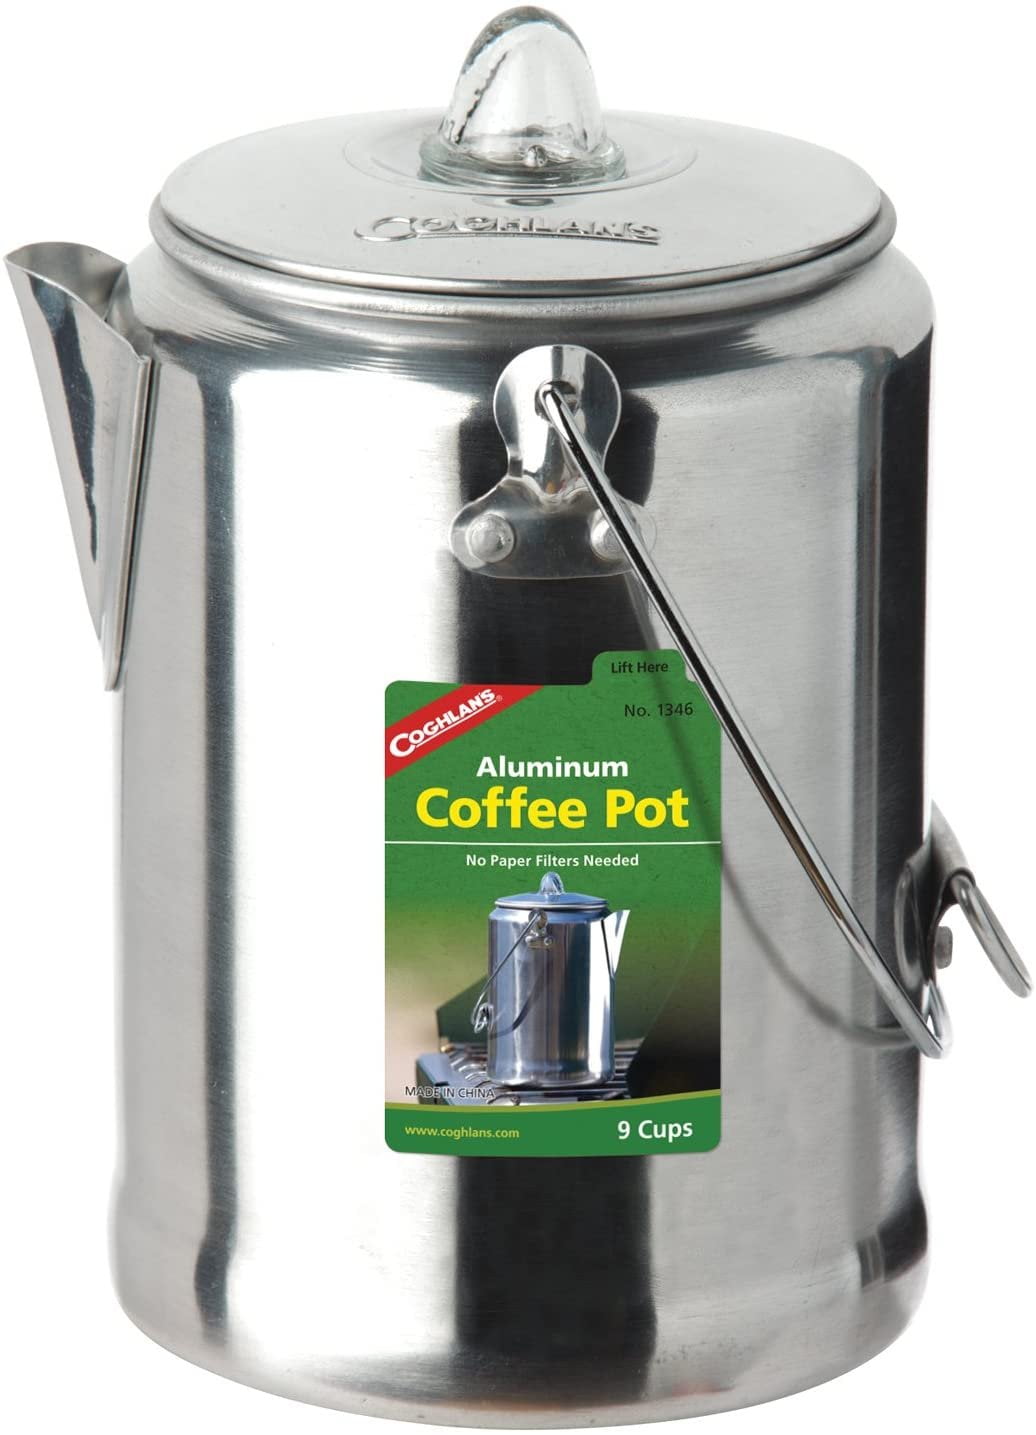 Steel replacement parts for aluminum coffee percolator?